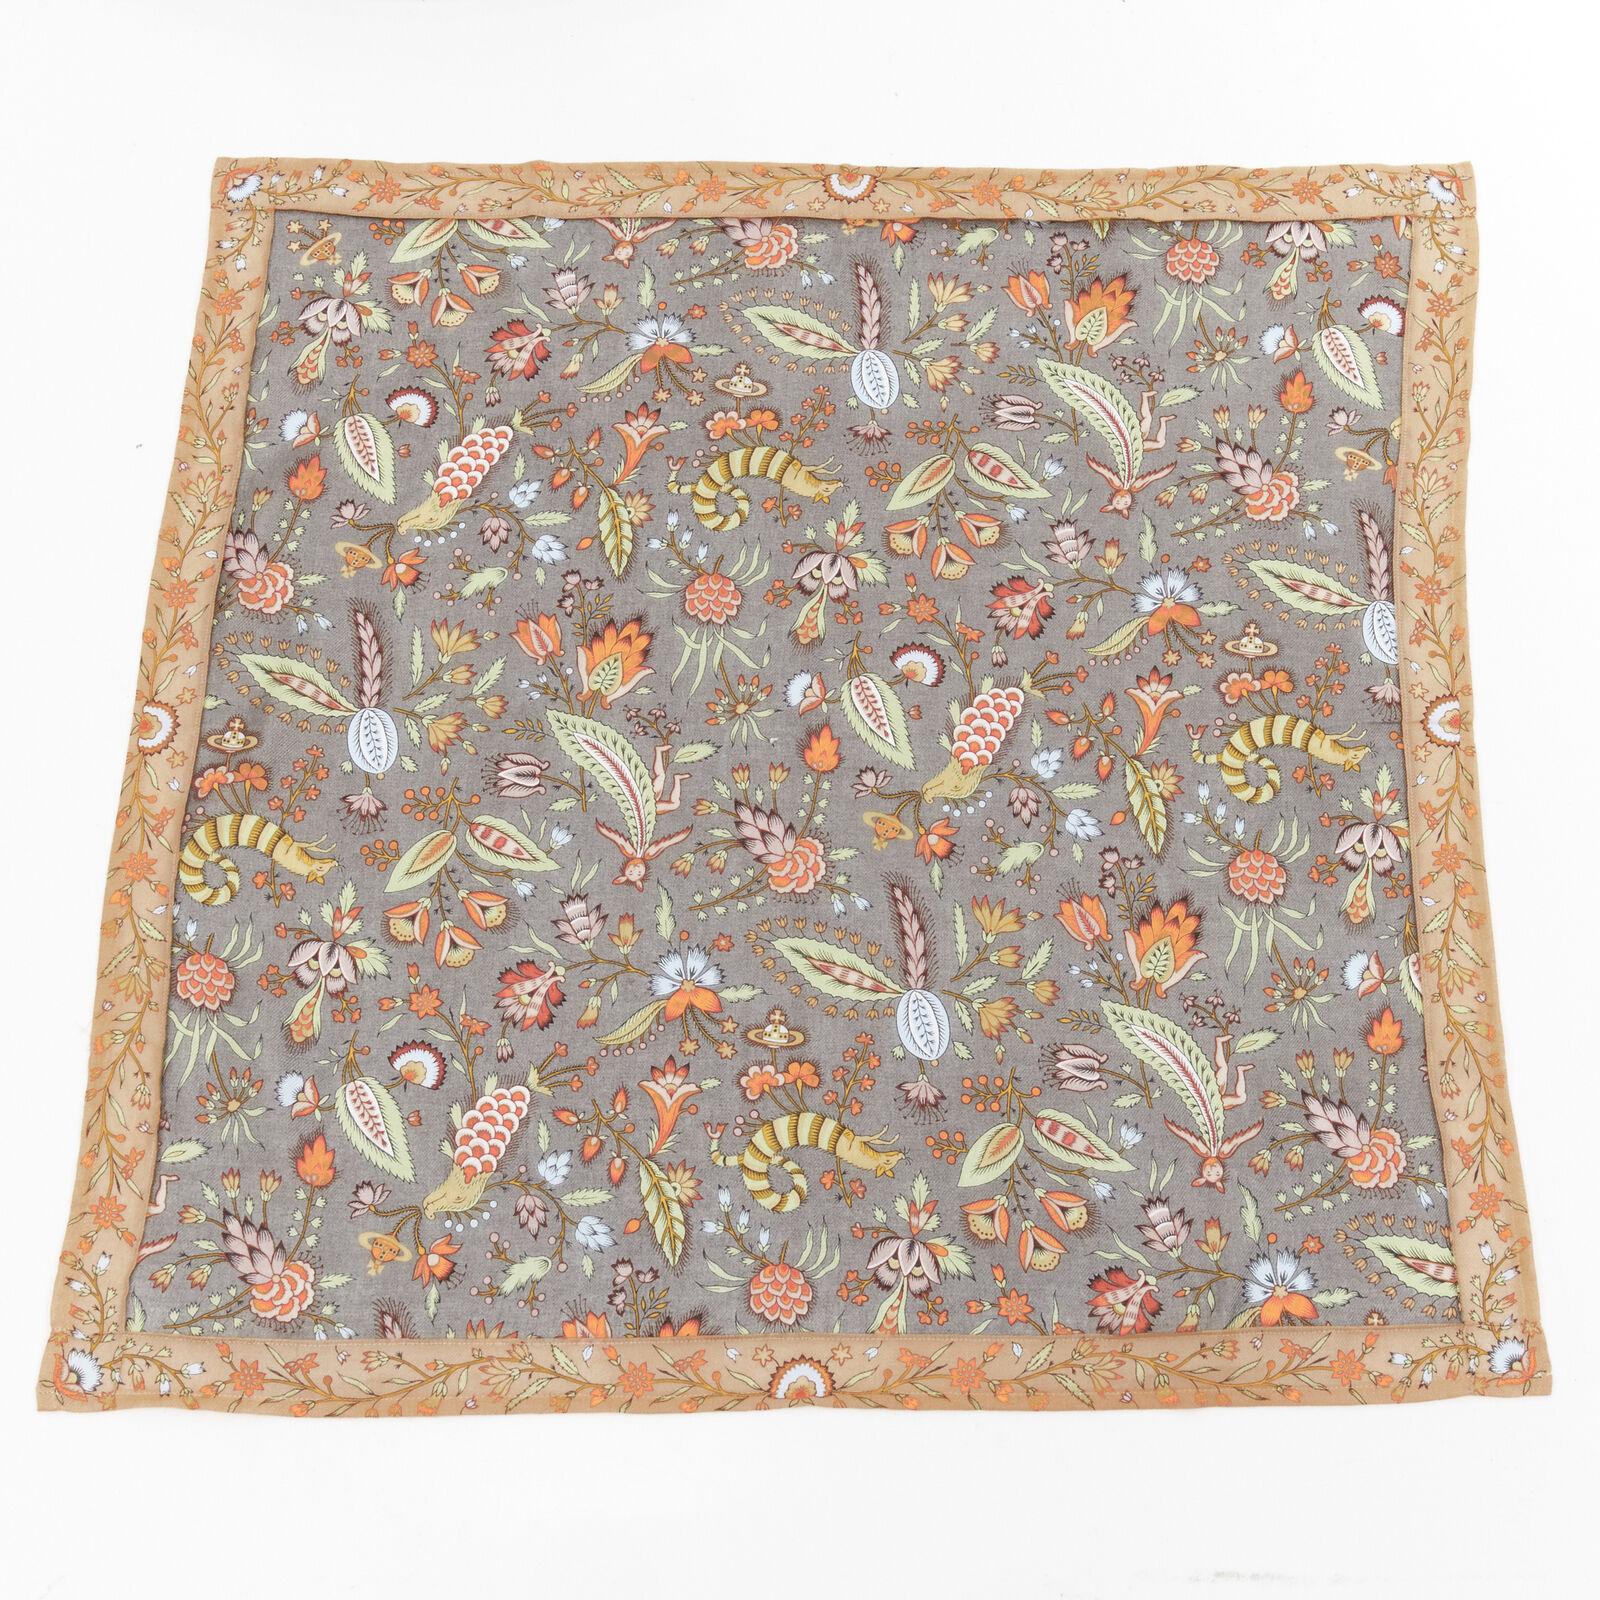 VIVIENNE WESTWOOD orb logo mythical creatures floral handkerchief neckscarf
Reference: CRTI/A00728
Brand: Vivienne Westwood
Material: Cotton
Color: Grey, Orange
Pattern: Floral

CONDITION:
Condition: Excellent, this item was pre-owned and is in